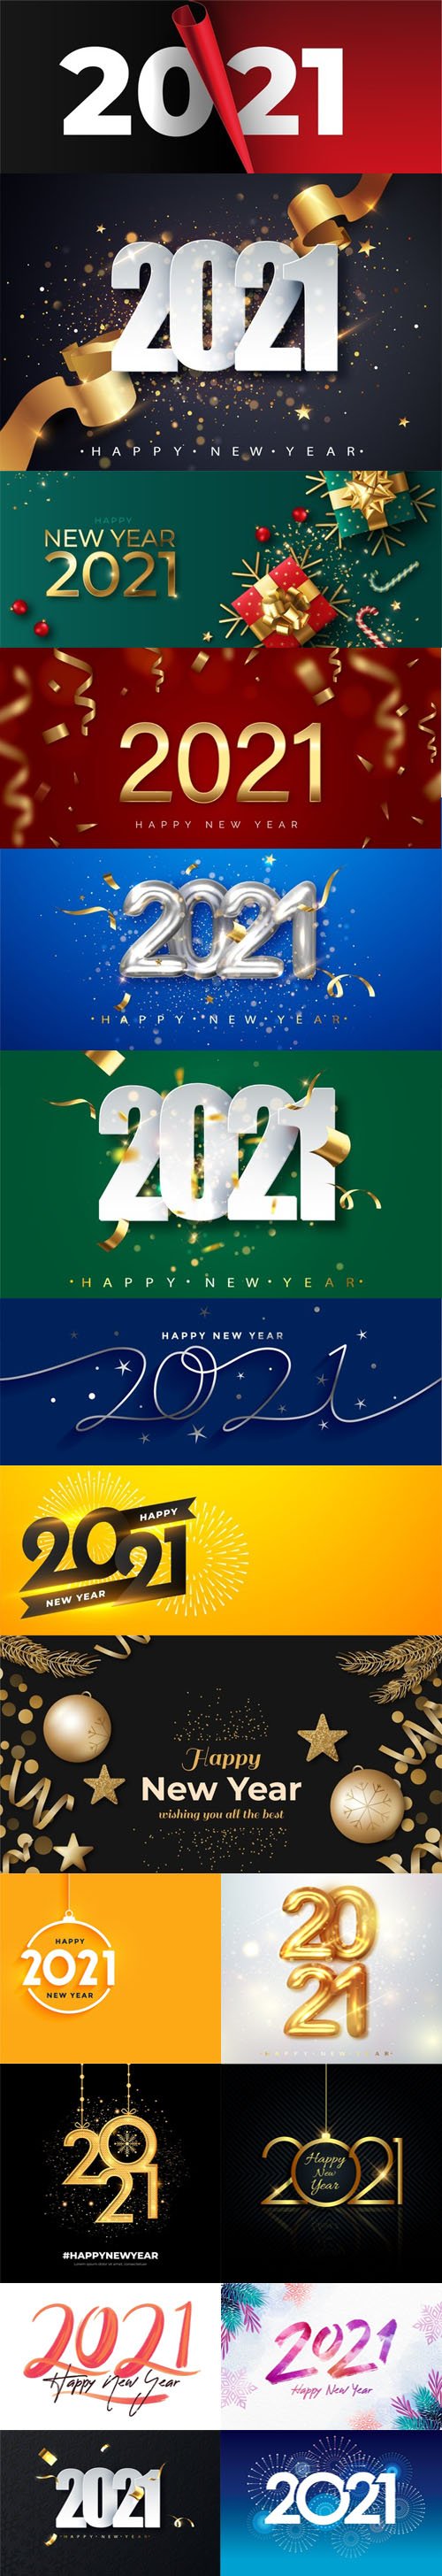 17 Happy New Year 2021 Backgrounds Collection in Vector